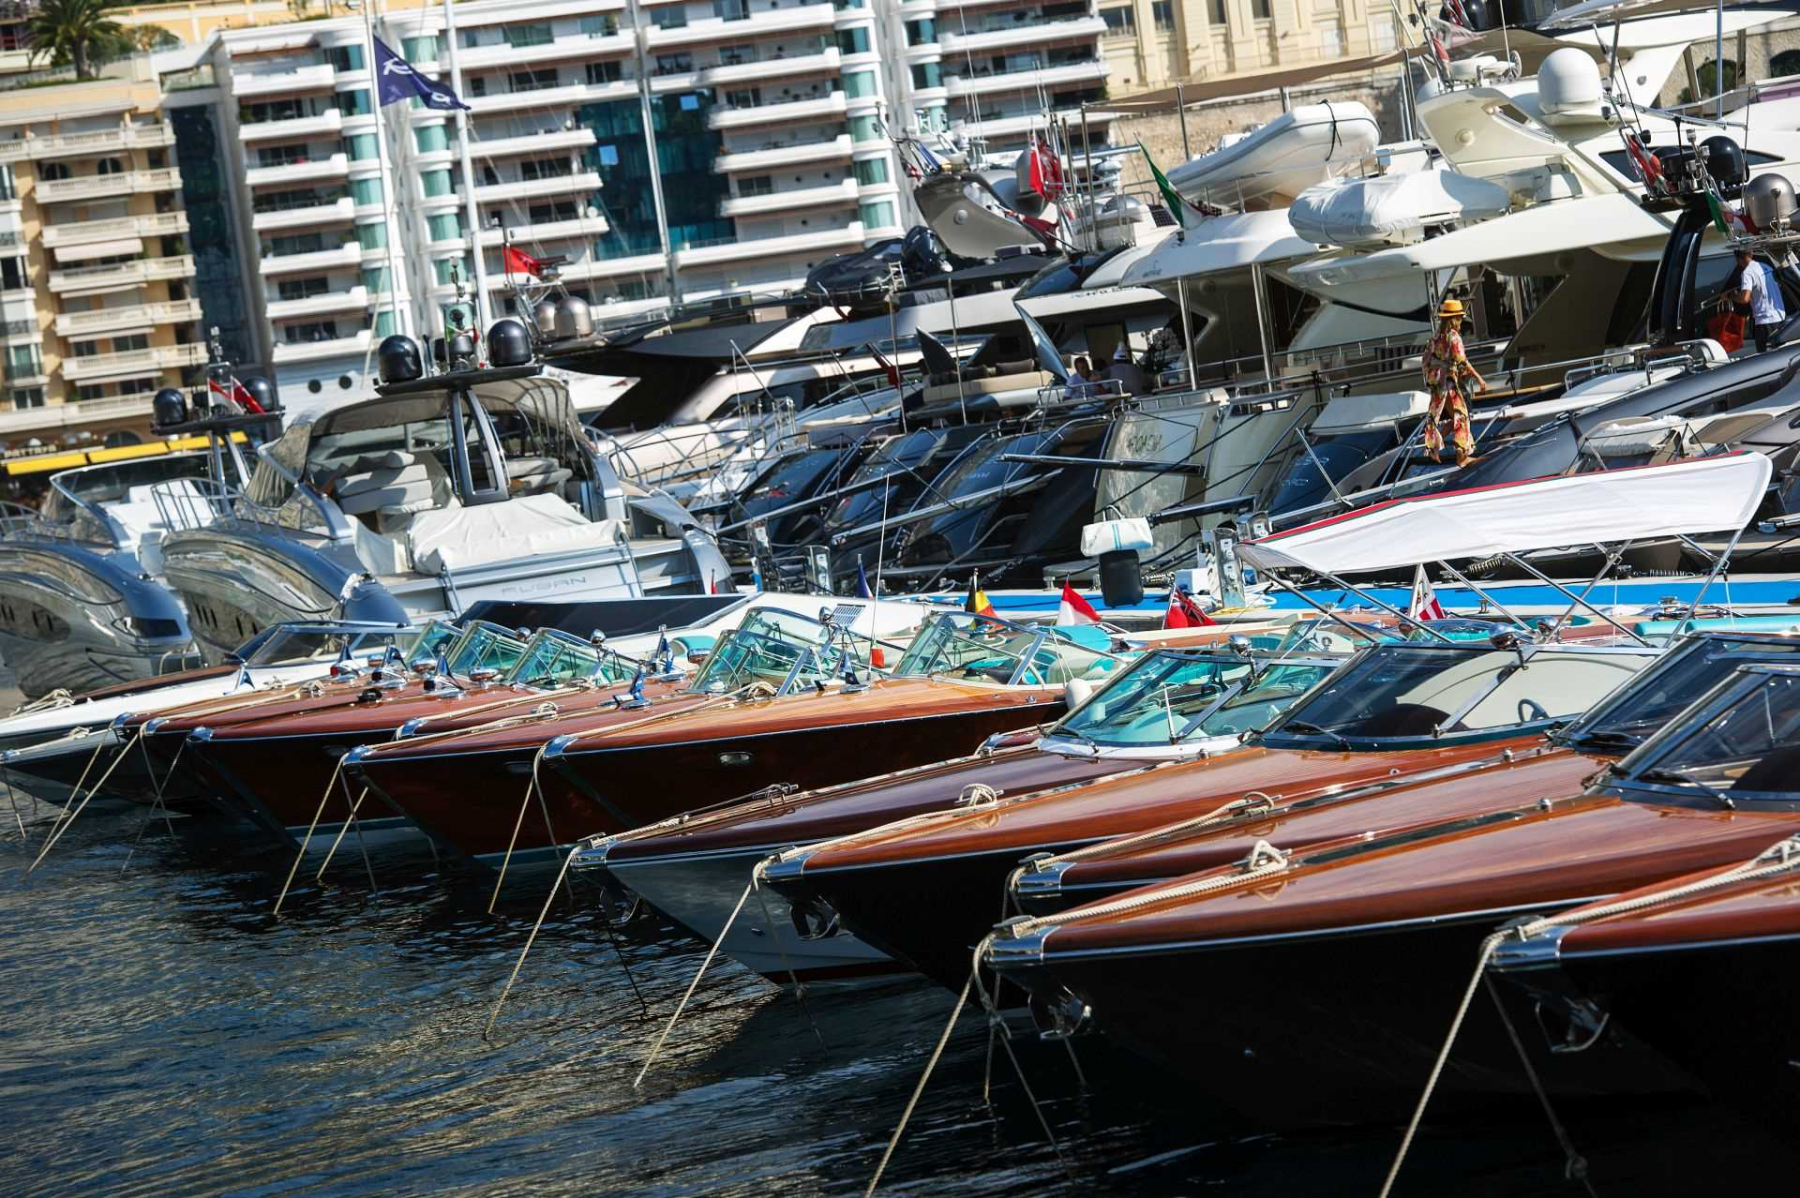 Riva style at the boat show